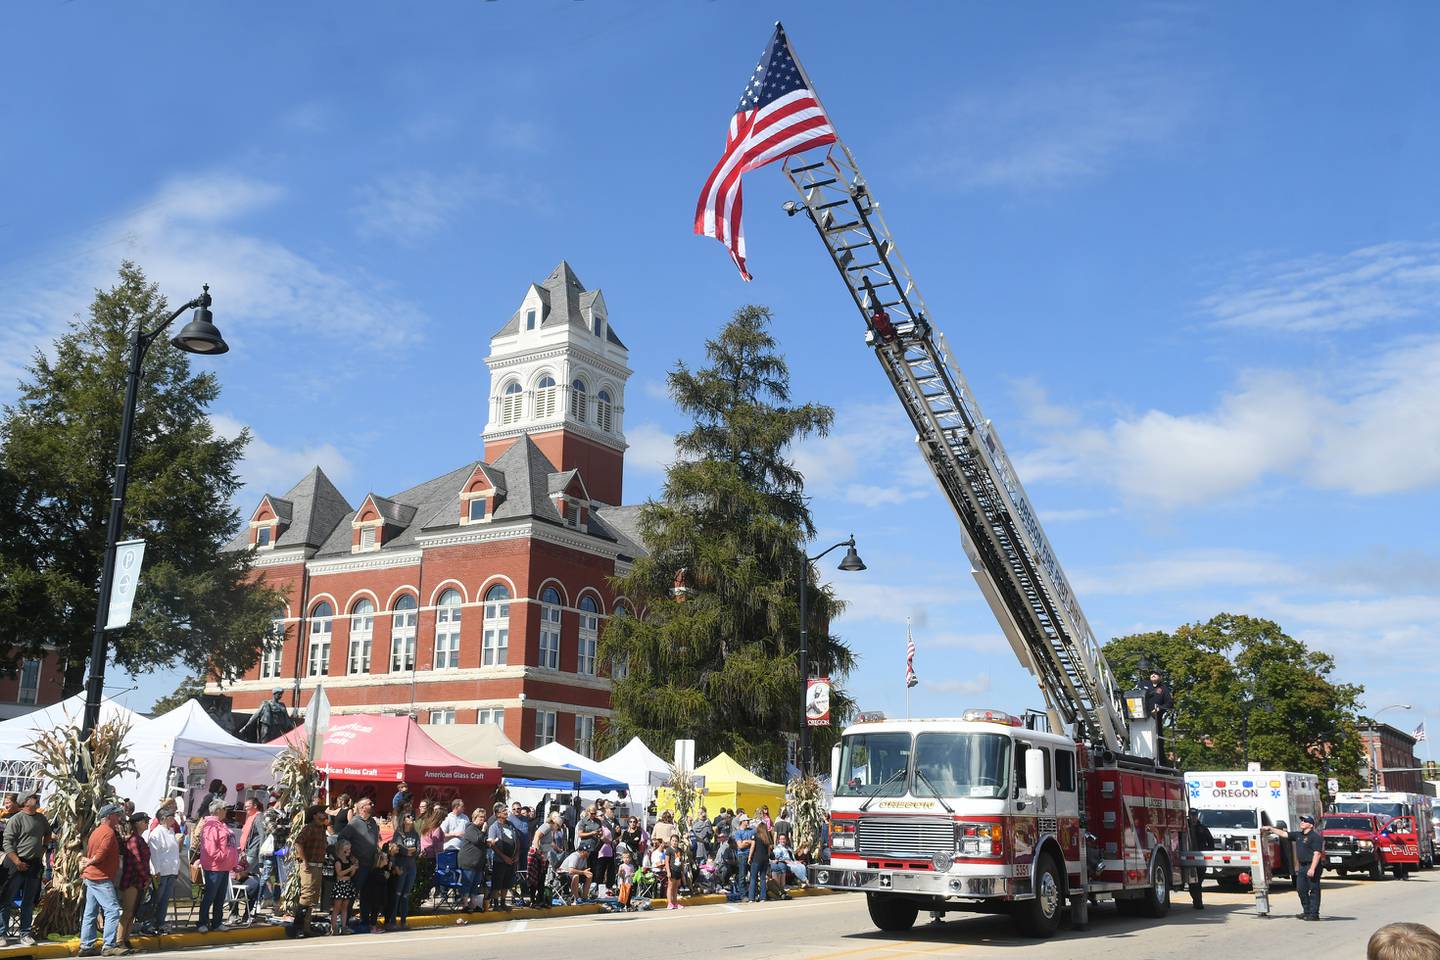 The Oregon Fire Department raises the flag at the start of the 2022 Harvest Time Parade during the 51st Autumn on Parade festival in downtown Oregon.